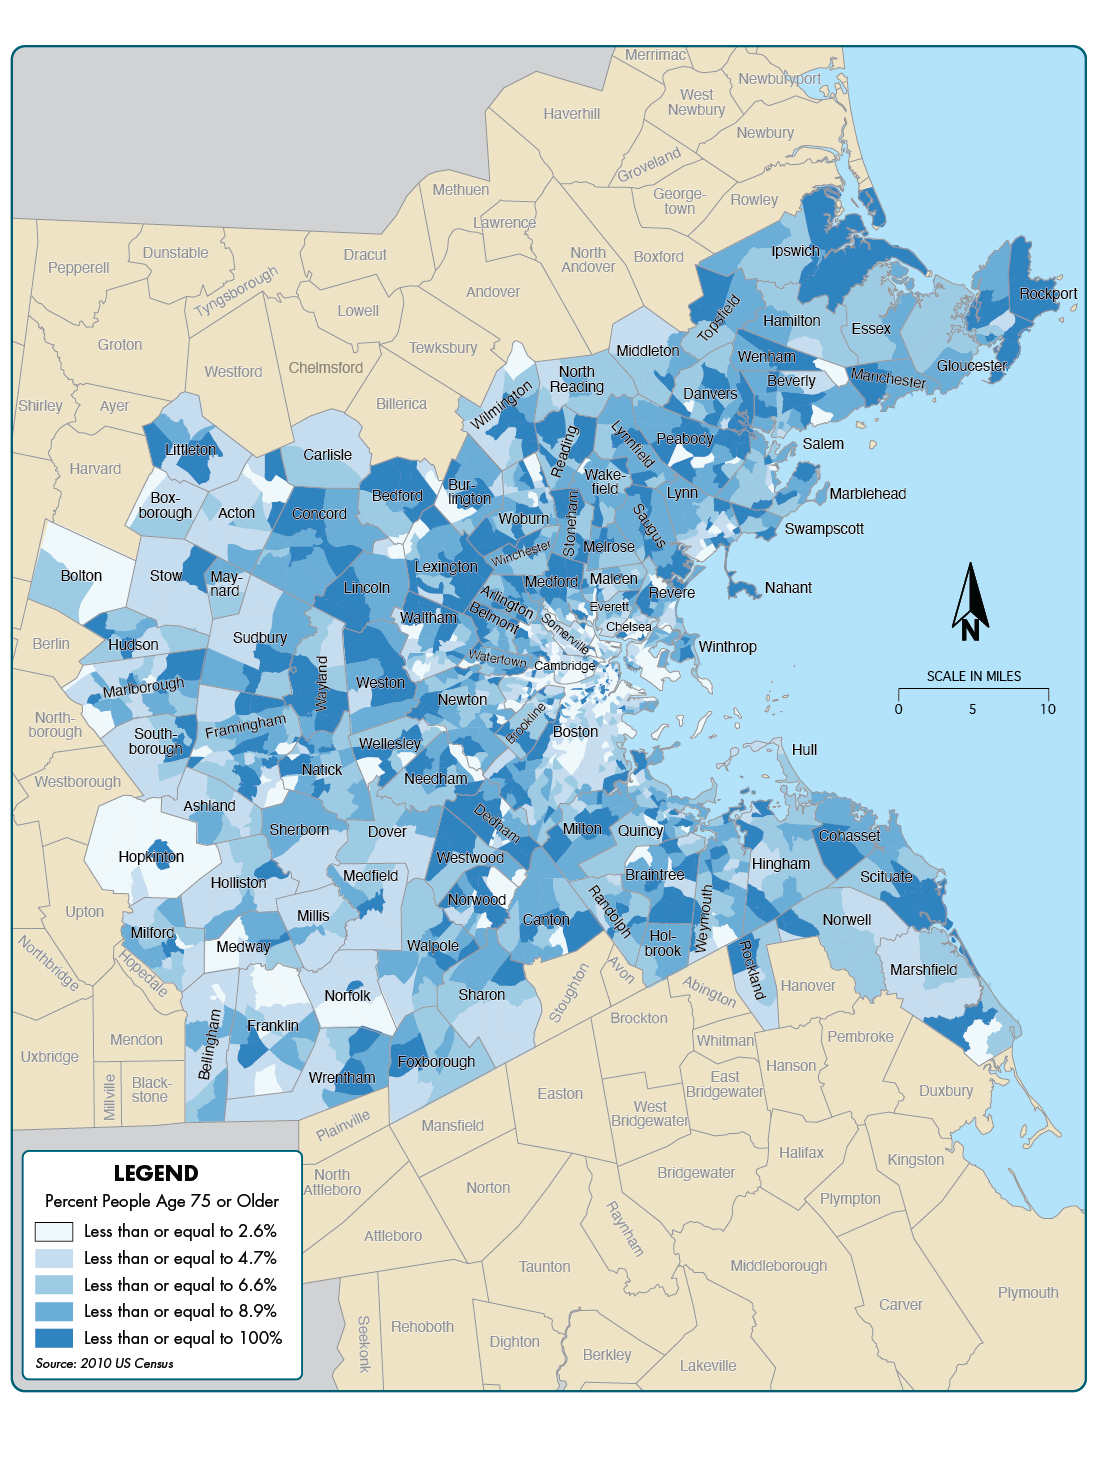 Figure 6-4 is a map showing the percent of the population that is age 75 or older across the 97 communities in the Boston region.